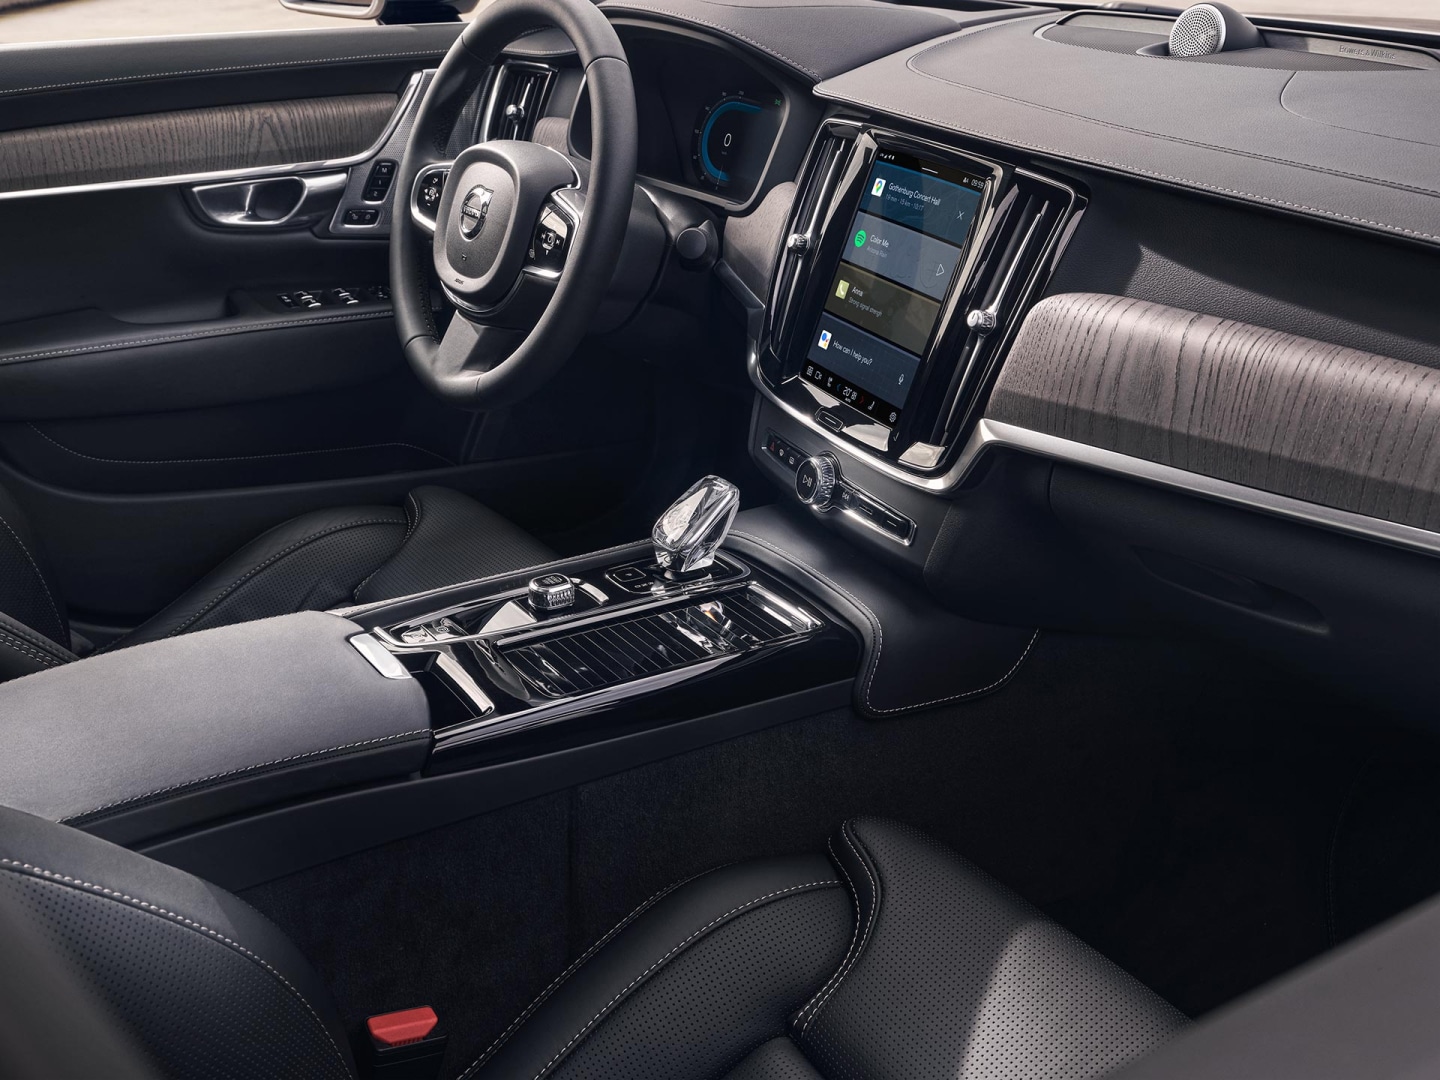 Interior view of the driver's seat, steering wheel and touchscreen centre display from the inside of a Volvo S90.